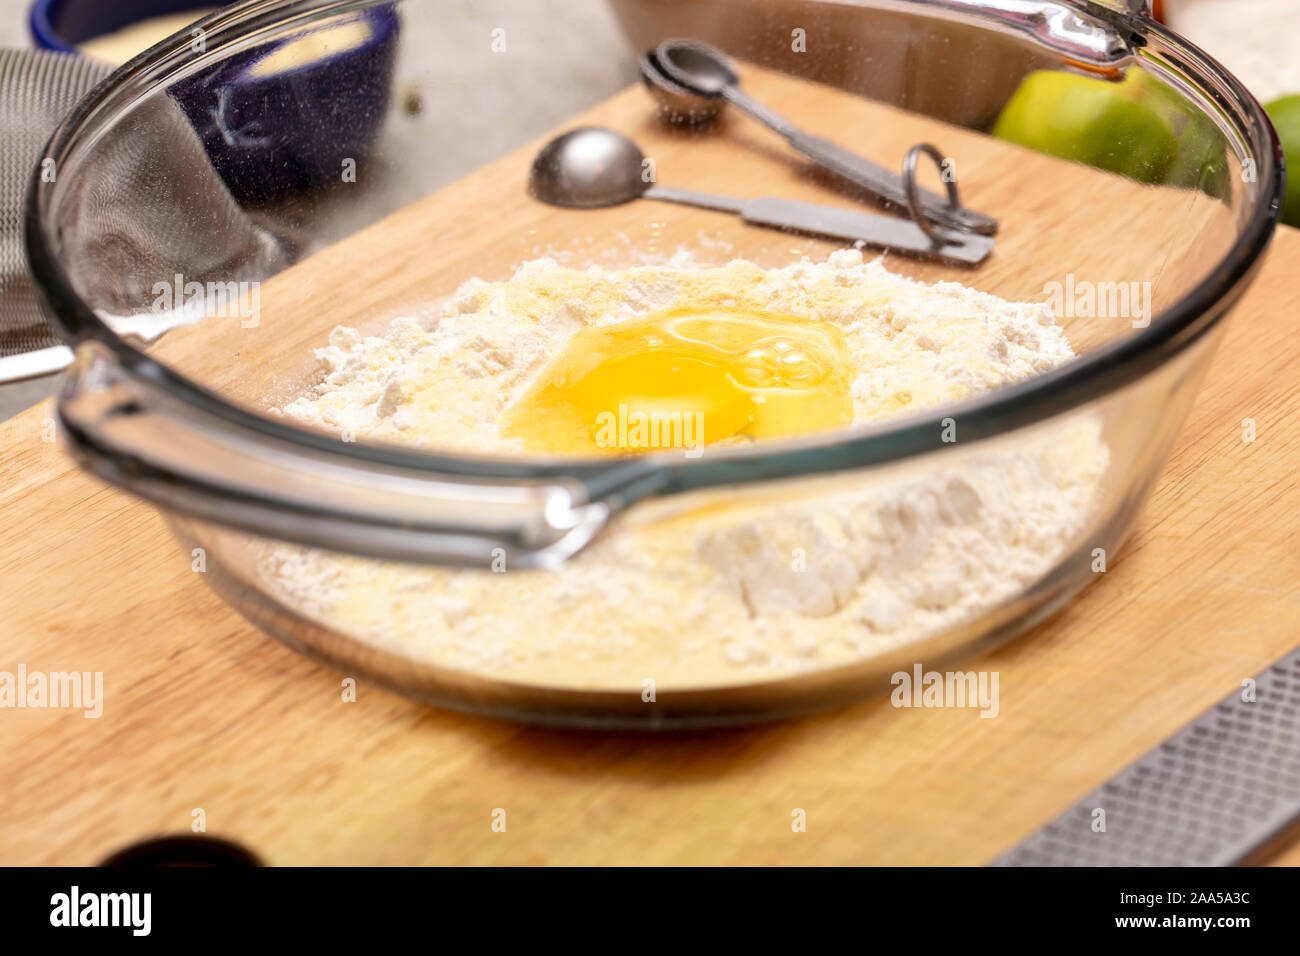 Pasta dough being made with flour and eggs during a pasta making class Stock Photo